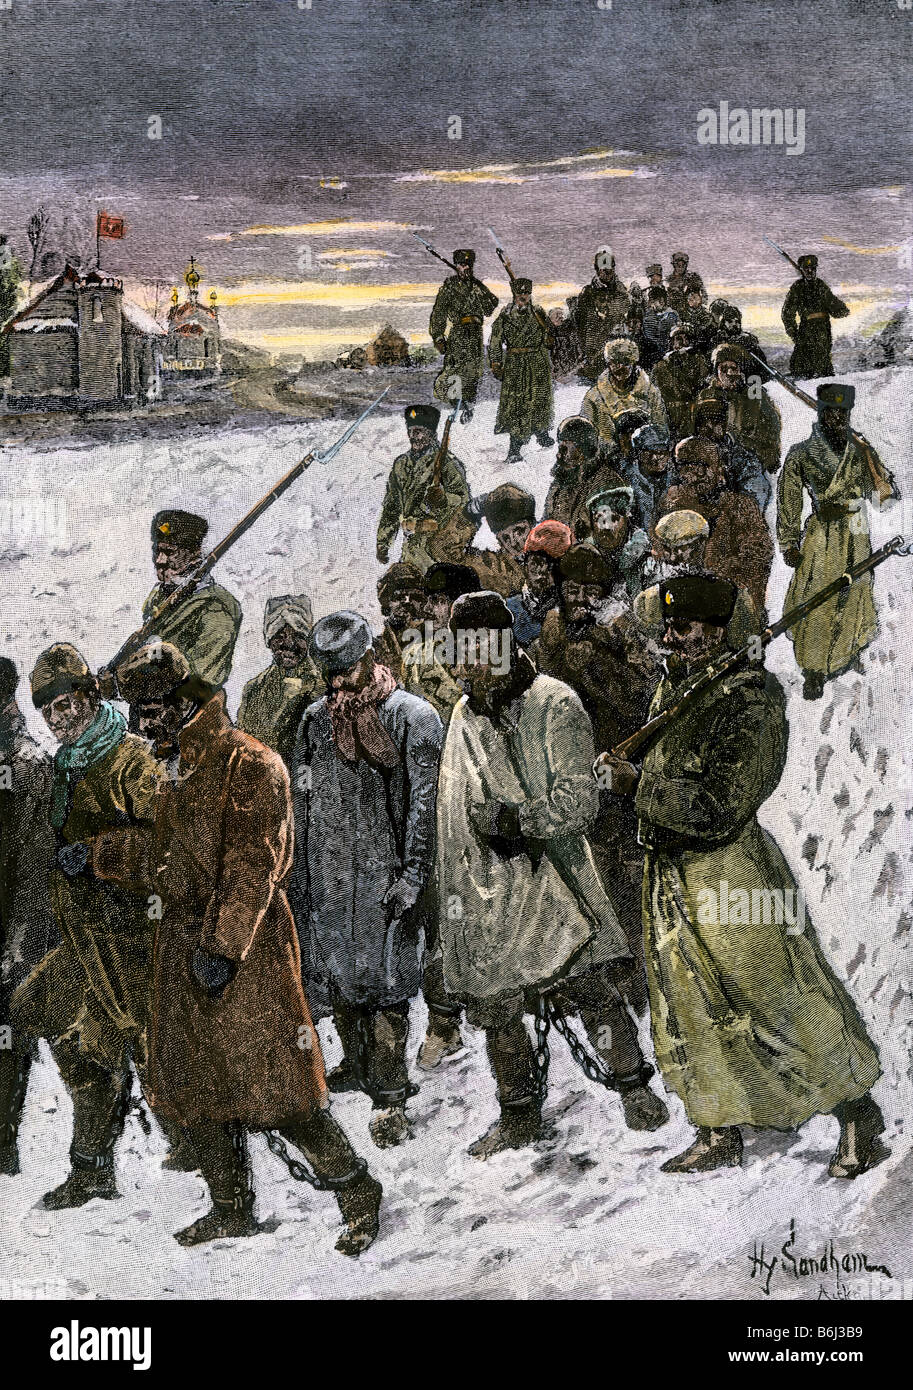 Russian convicts returning at night from the mines in Siberia 1880s. Hand-colored halftone of an illustration Stock Photo